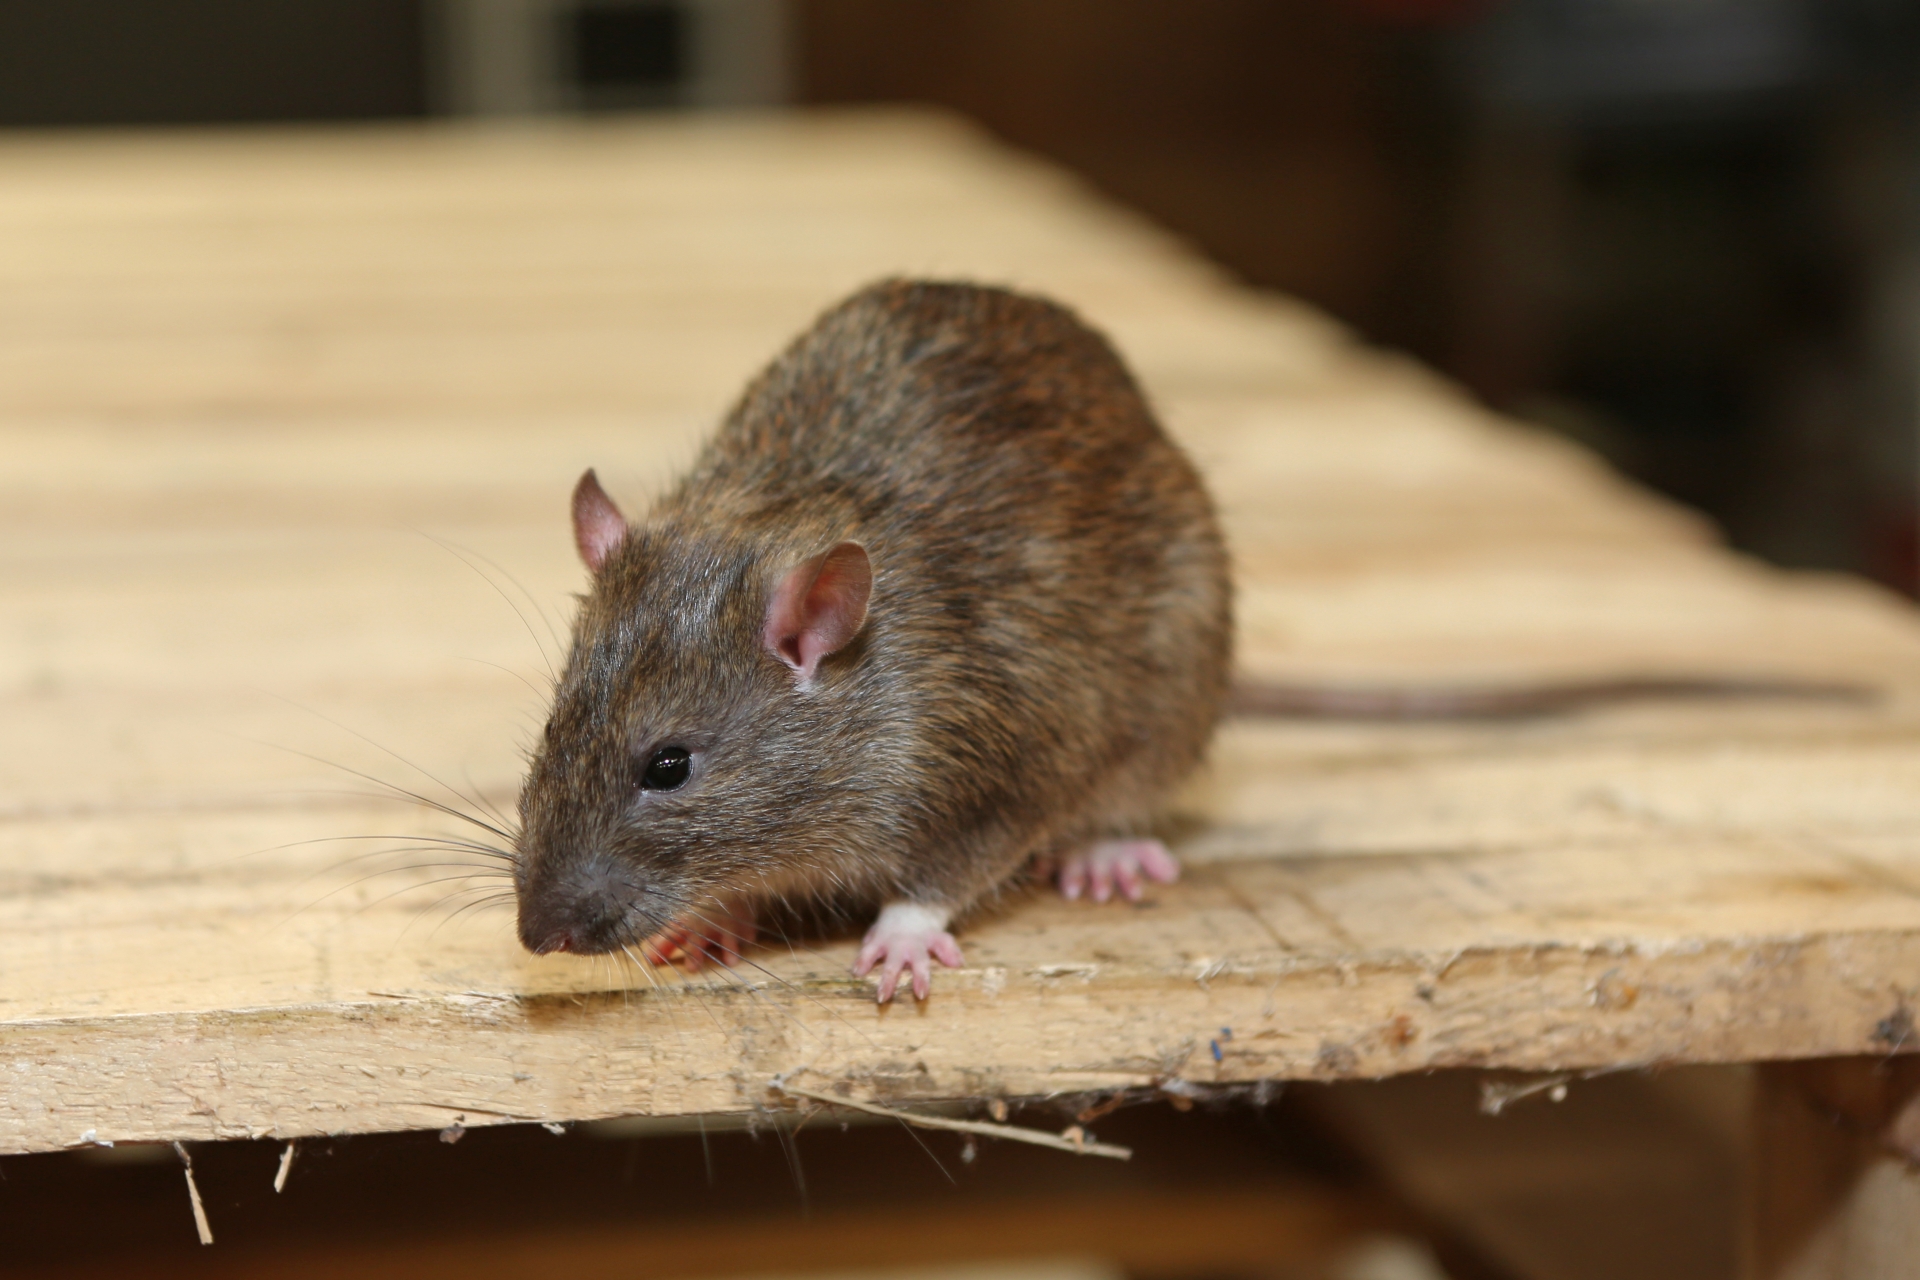 Rat extermination, Pest Control in Abbey Wood, SE2. Call Now 020 8166 9746